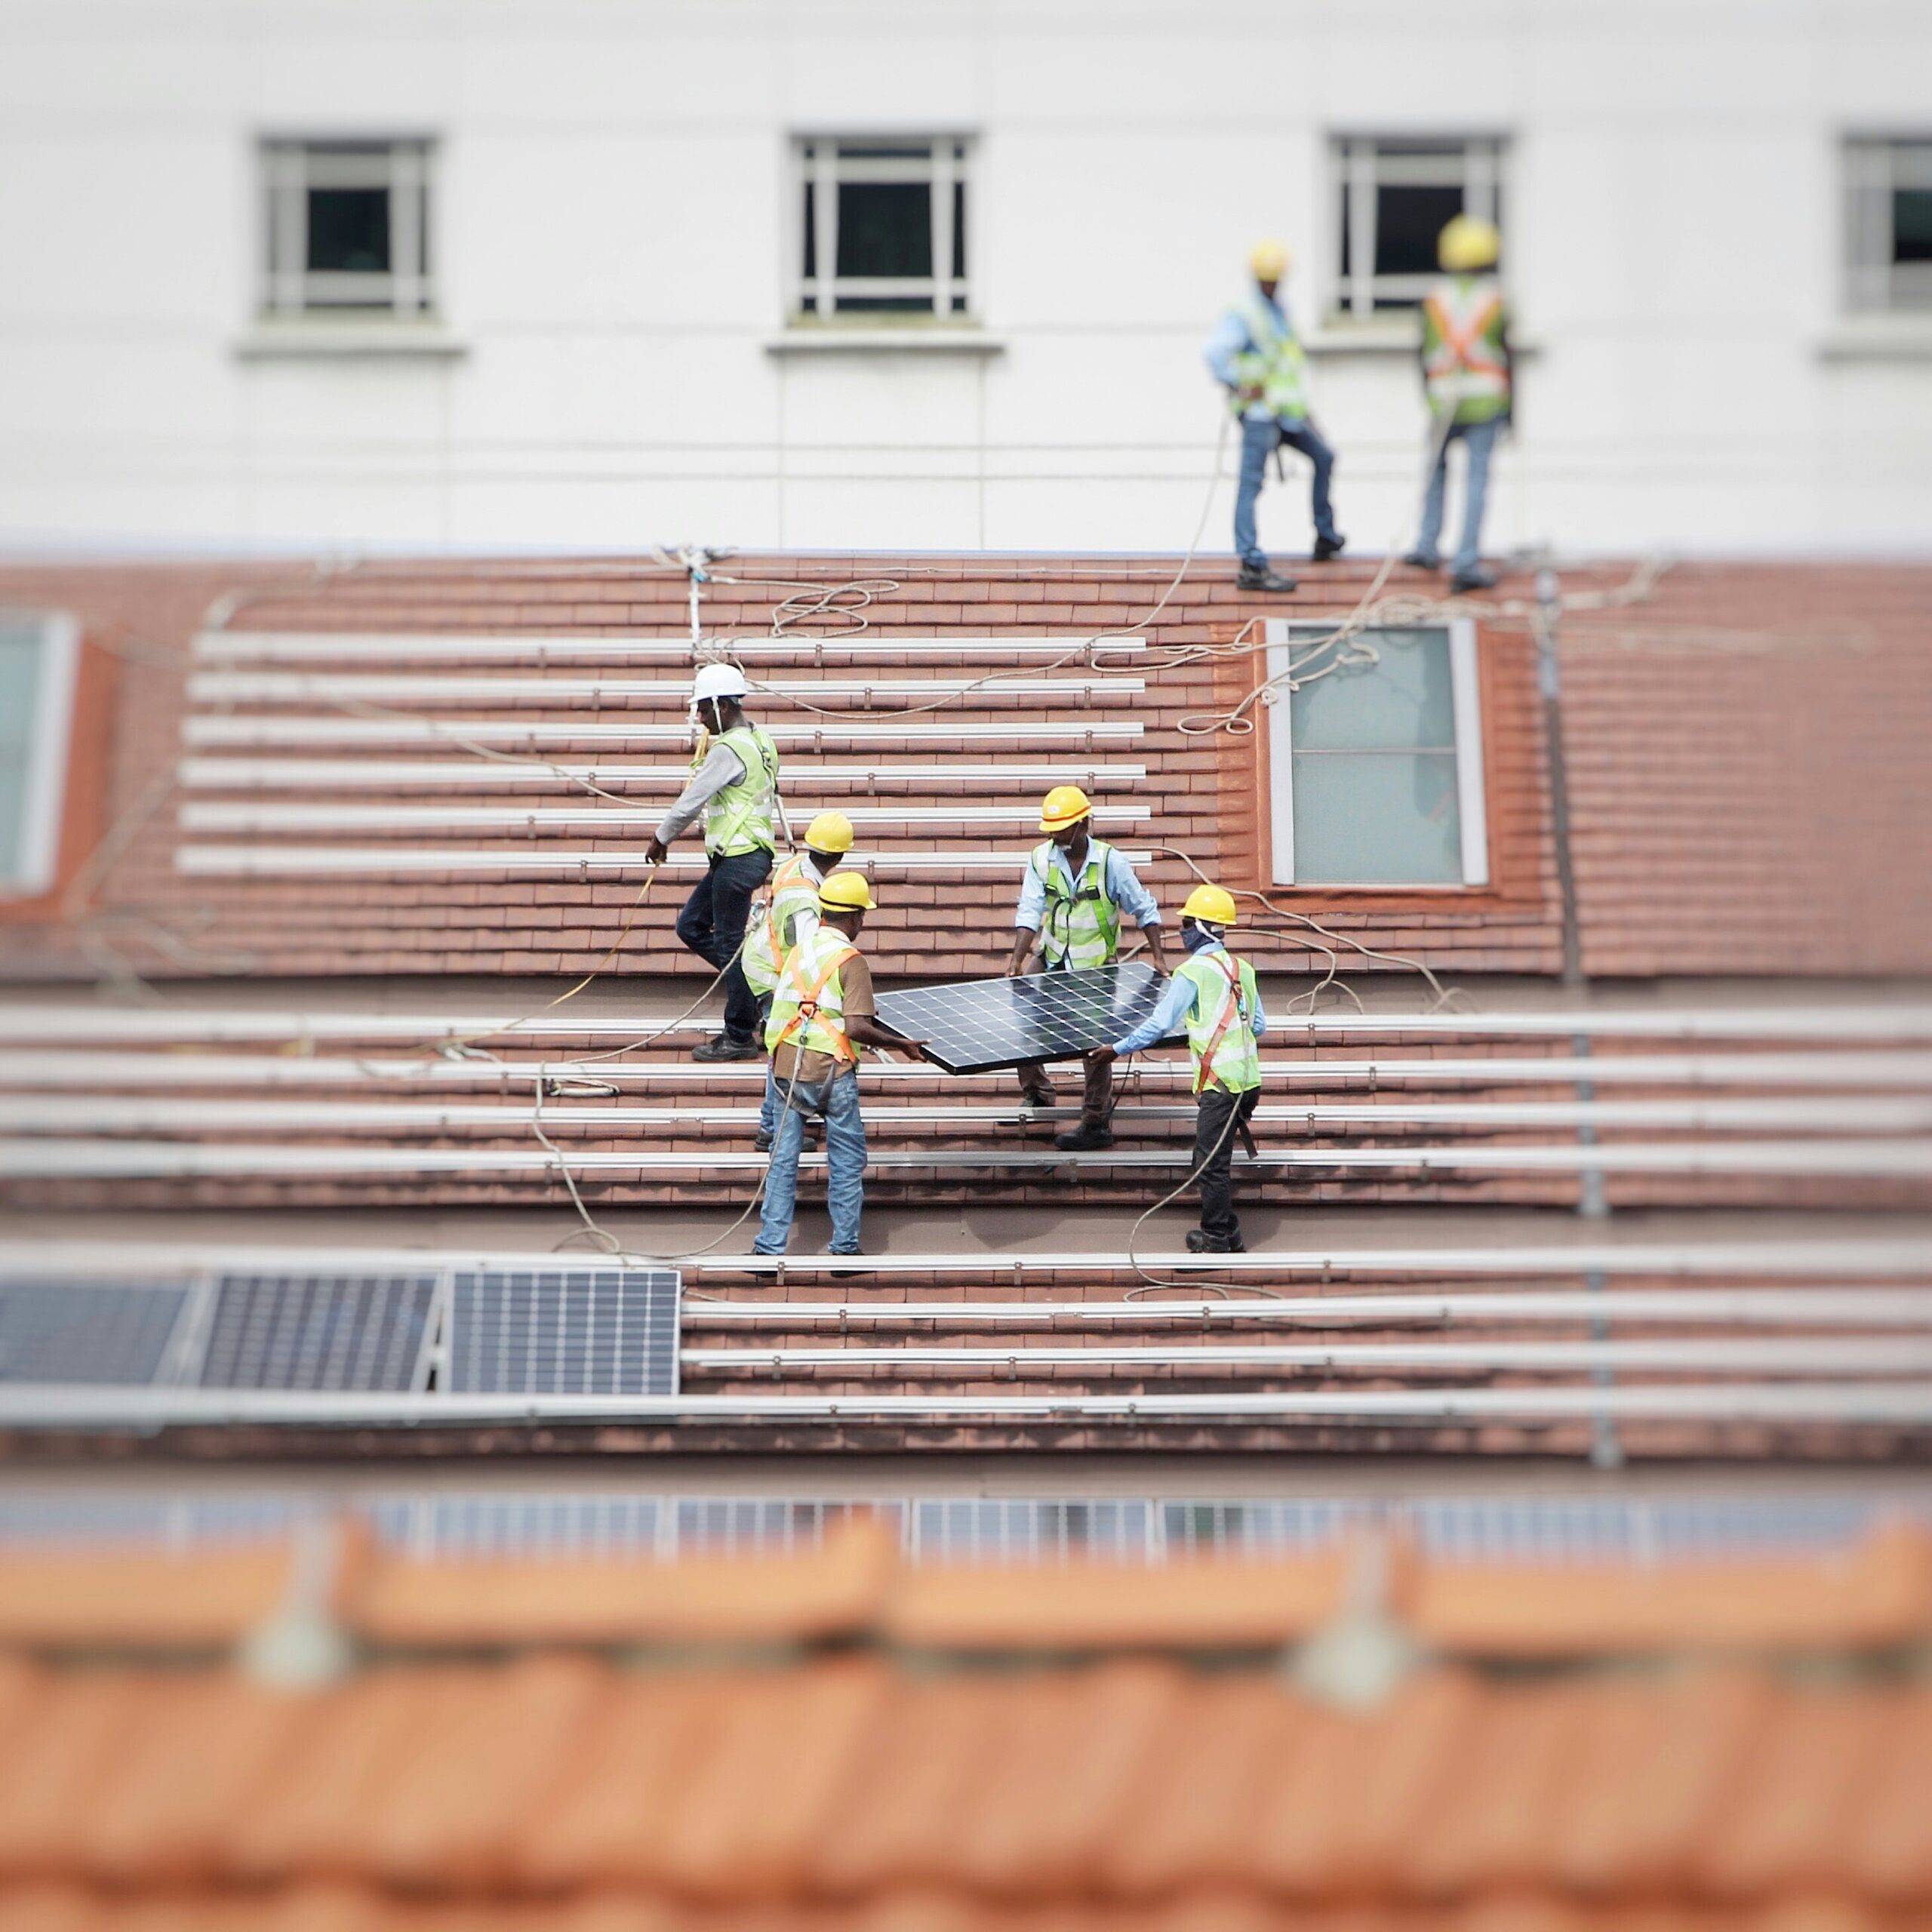 Installing PV panels in a routine solar installation.